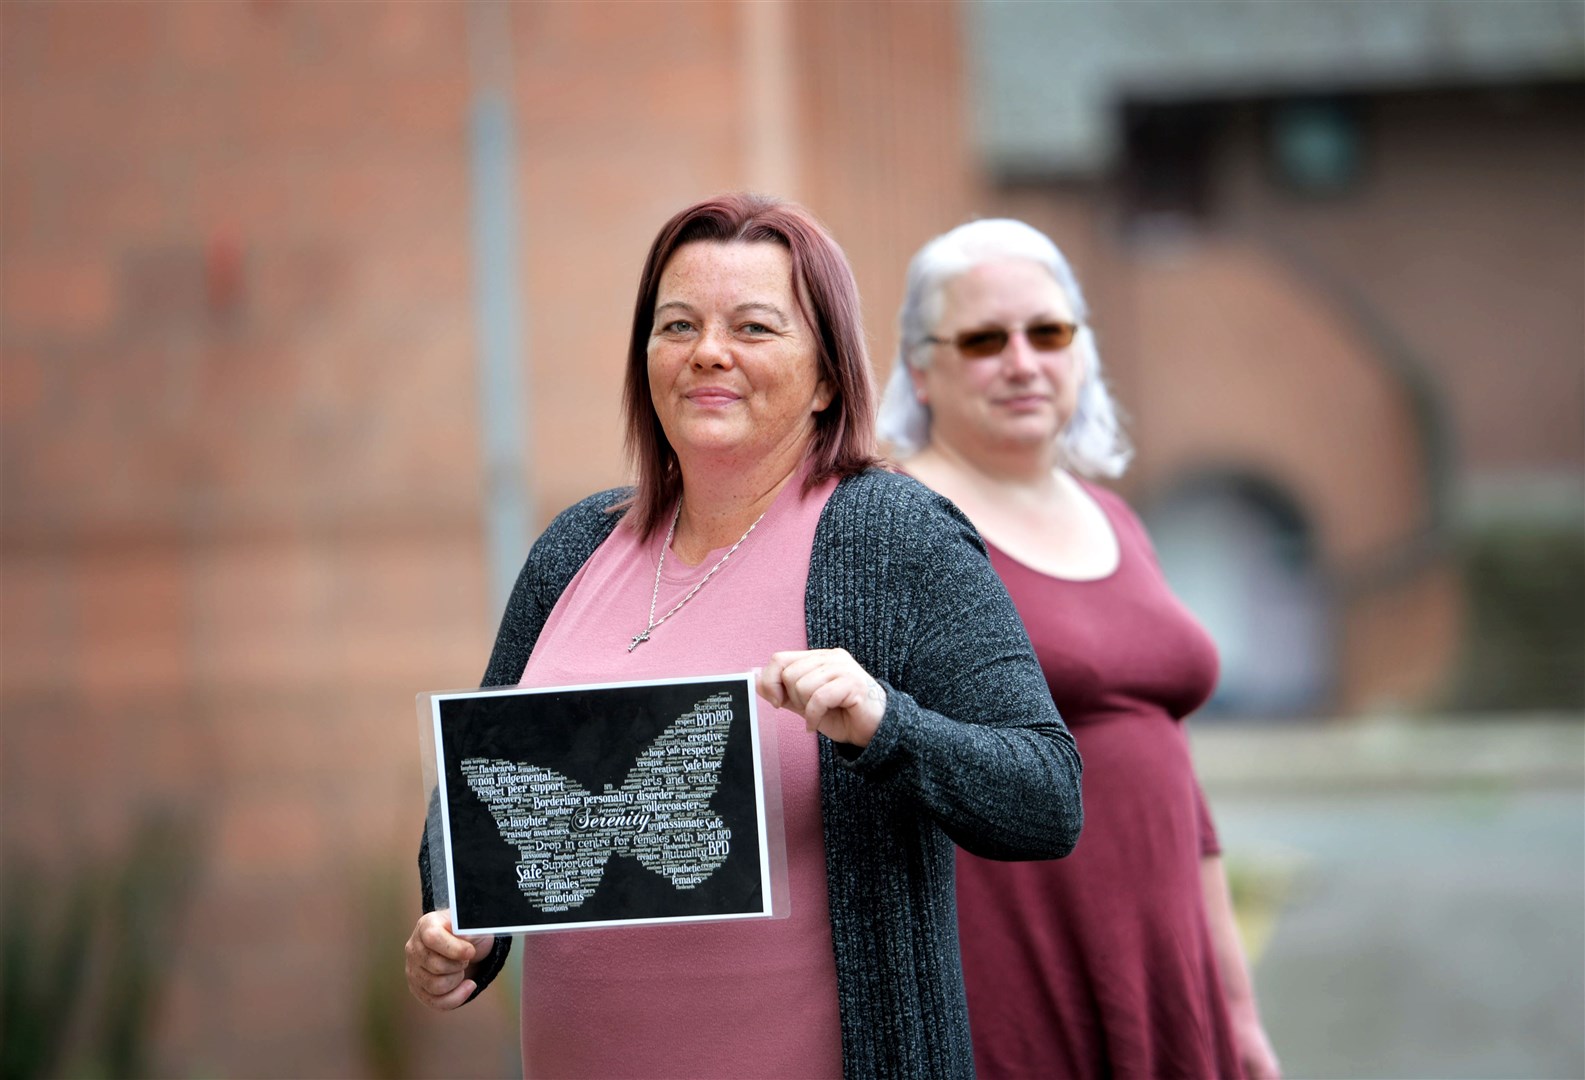 Serenity fear mental health impact of Covid-19 could be worse than currently expected. Viv Mackie and Margaret McLean believe a Dingwall branch of the group could help. Picture: Callum Mackay